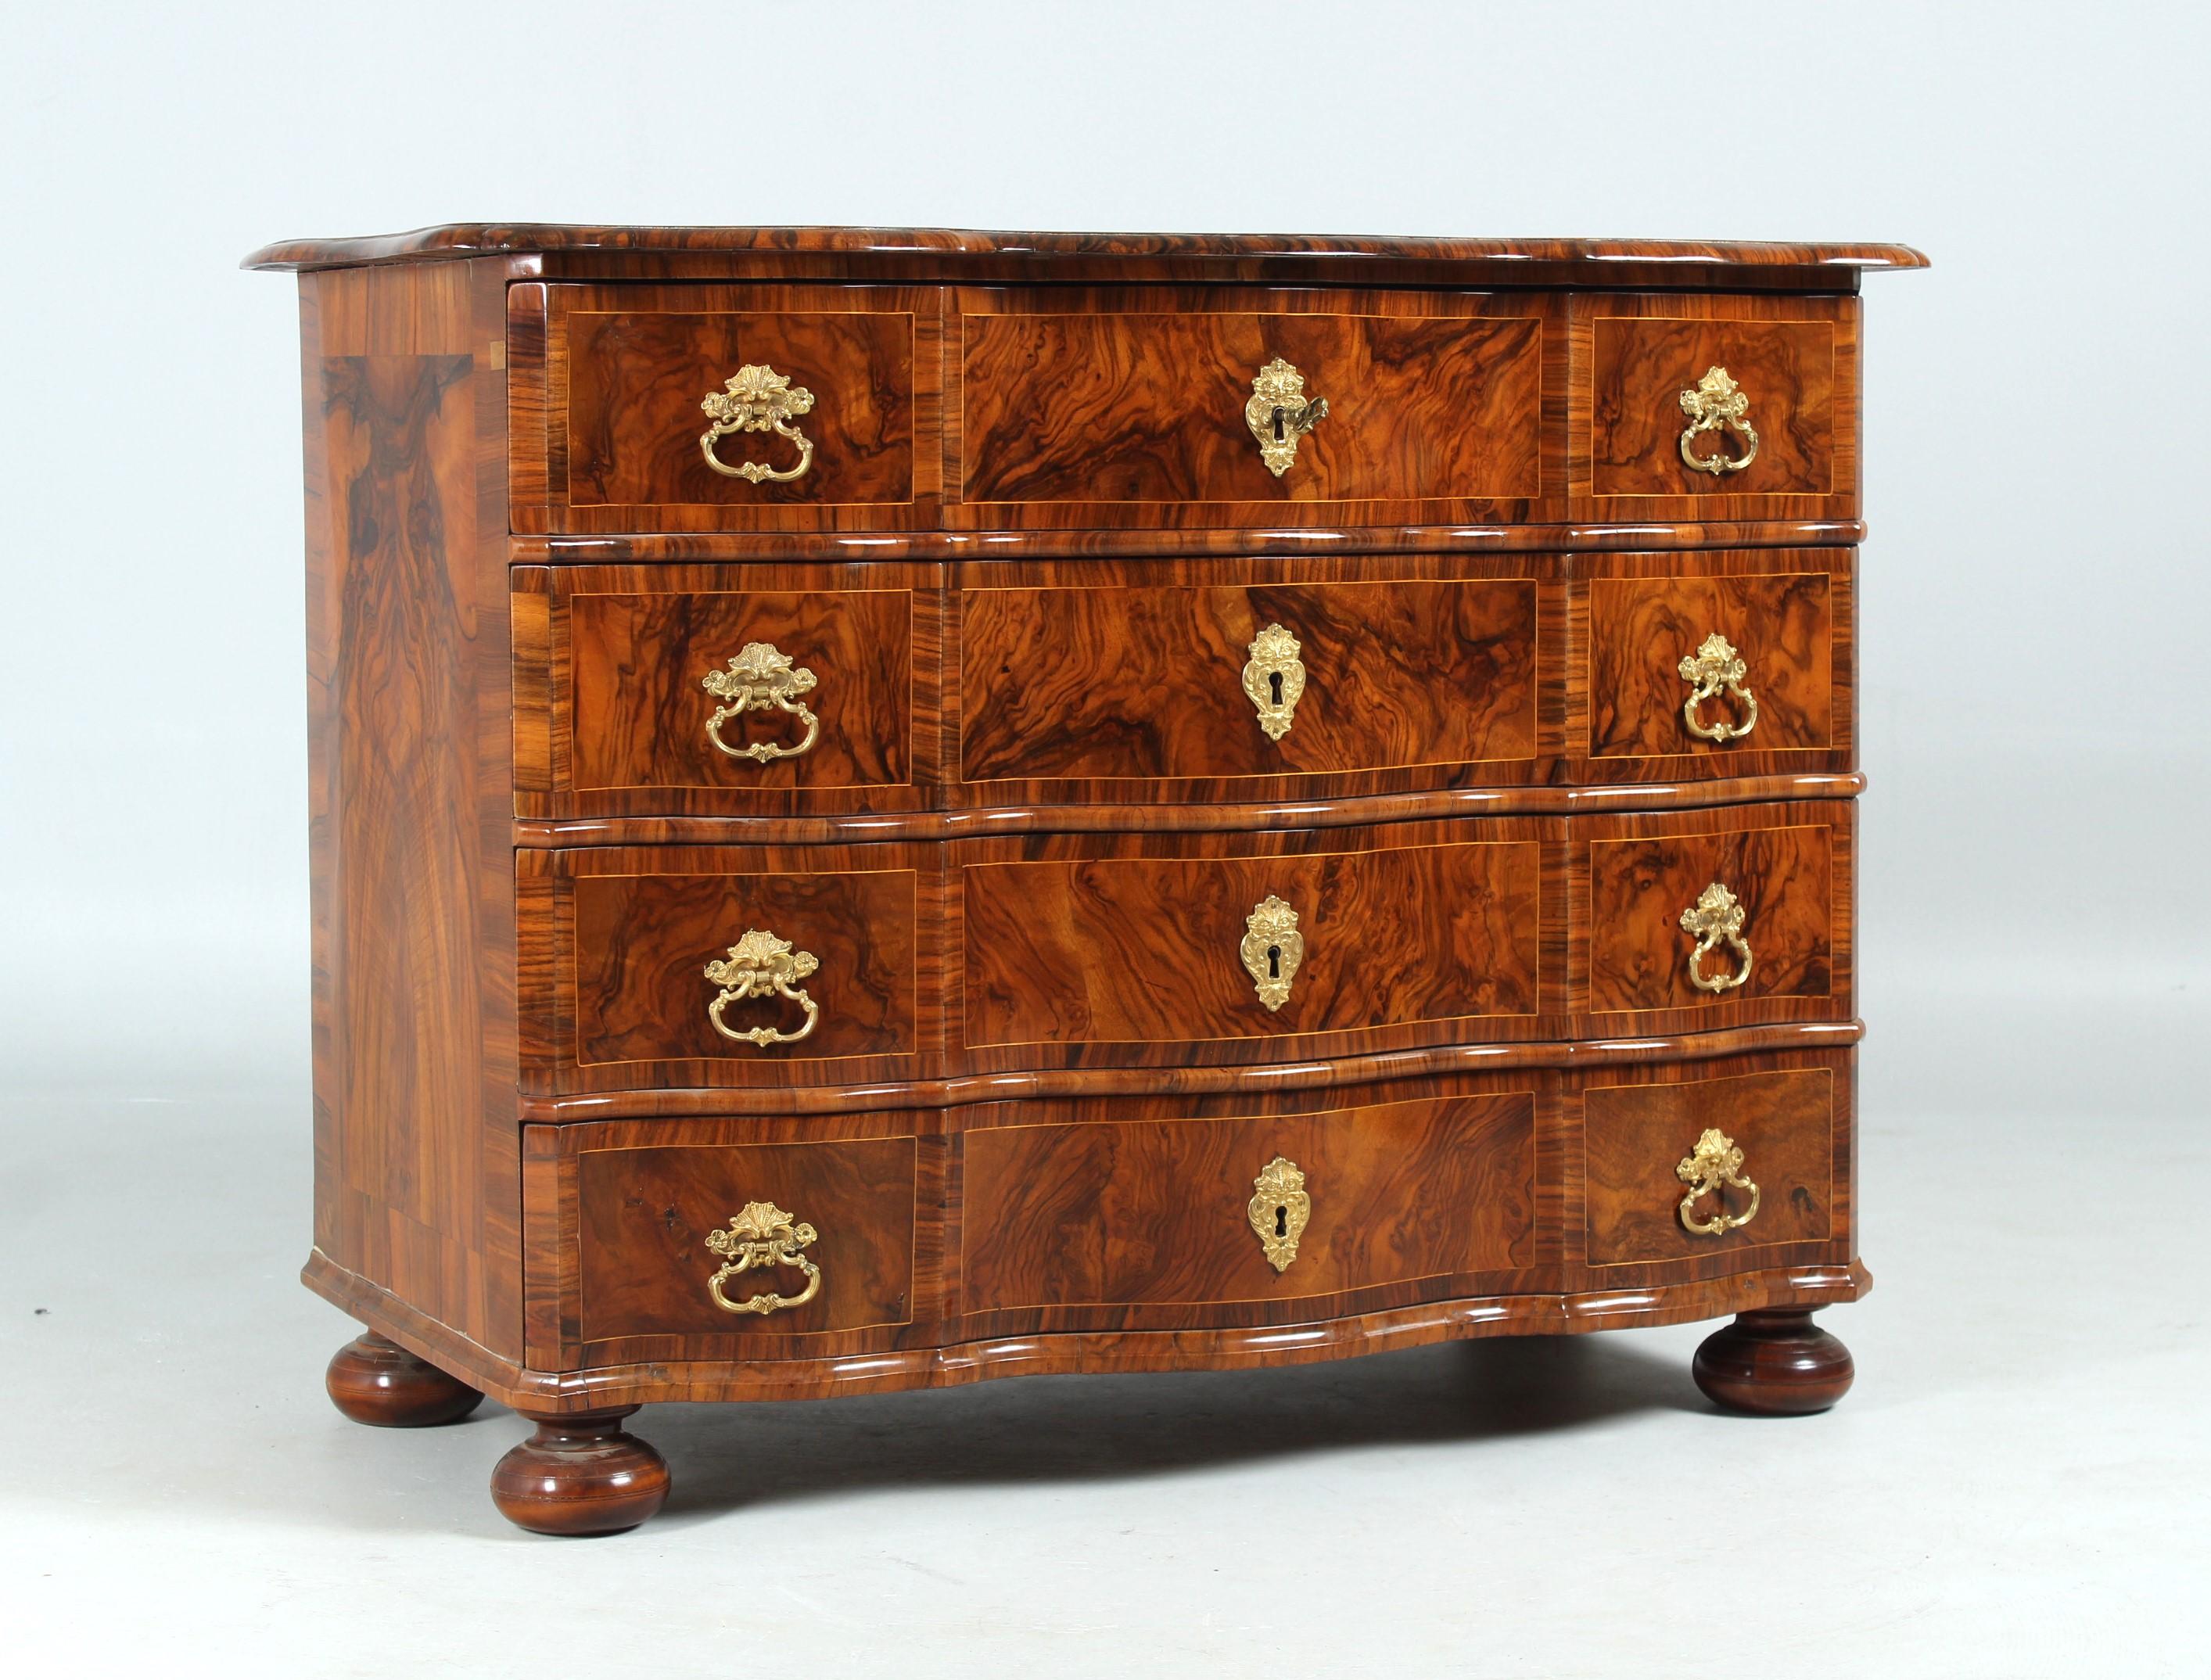 Antique chest of drawers, walnut veneer, four drawers

Hesse
Walnut
Baroque around 1750

Dimensions: H x W x D: 86 x 115 x 61 cm

Description:
Baroque four-bay chest of drawers with curved front standing on ball feet.

The base and the